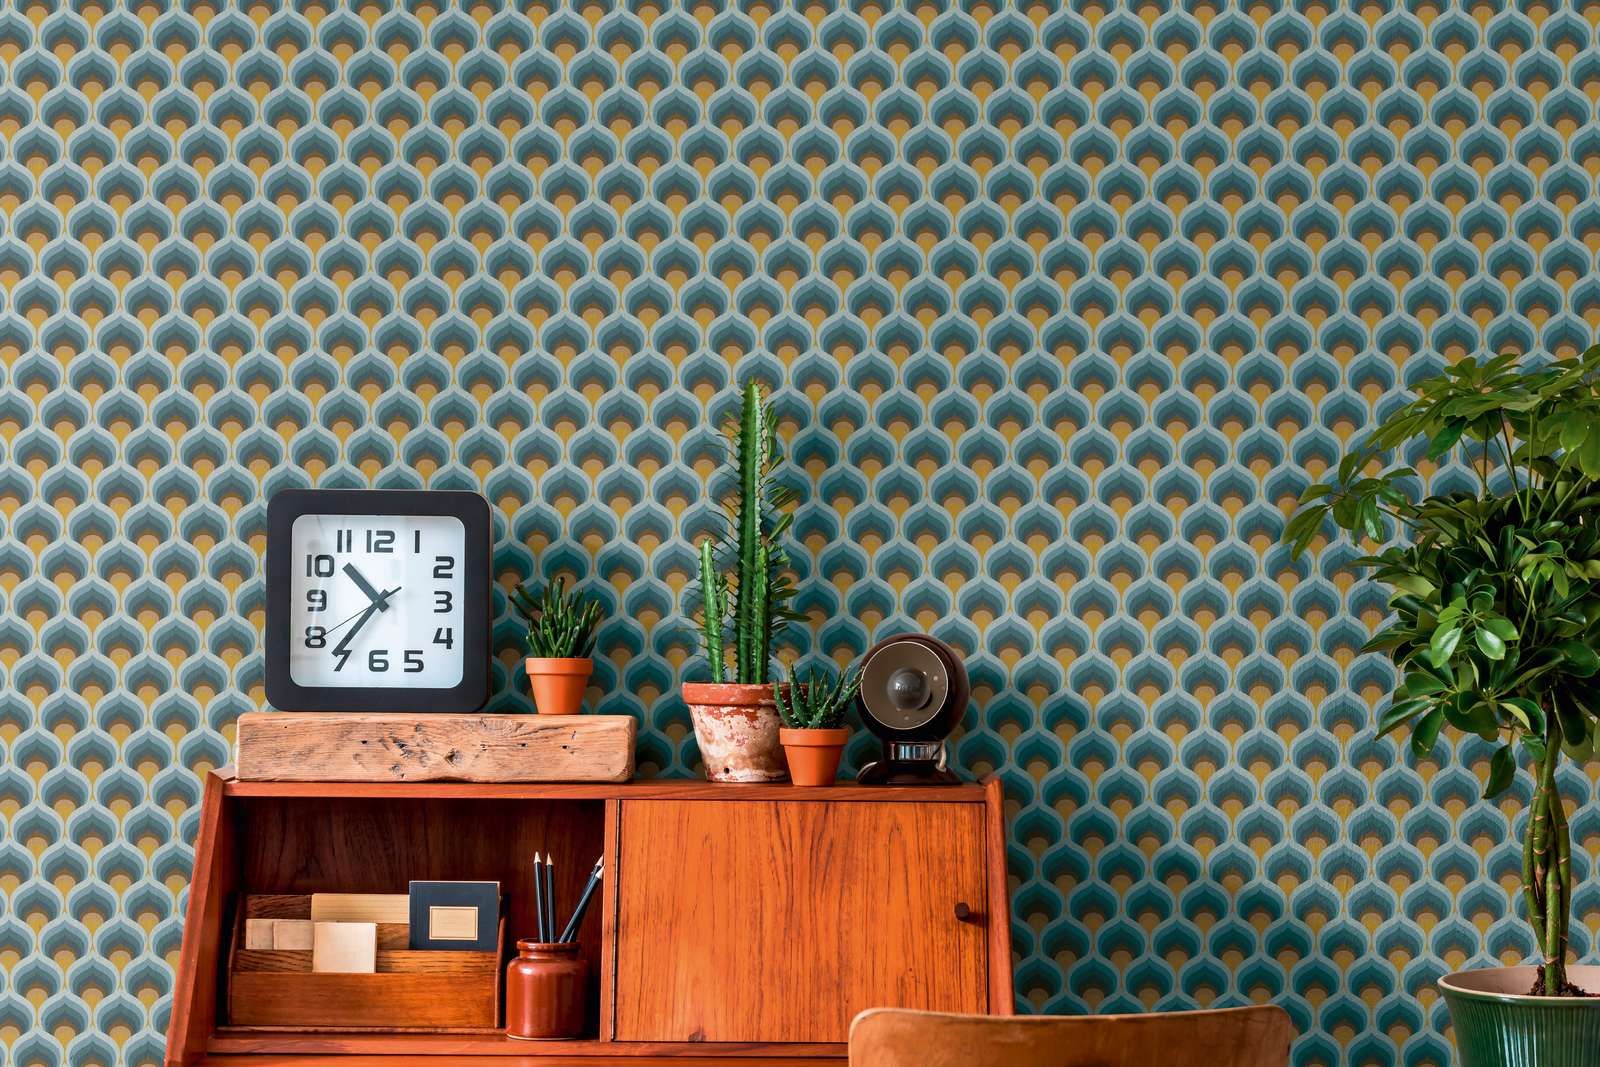             Non-woven wallpaper with retro scale pattern - blue, brown, yellow
        